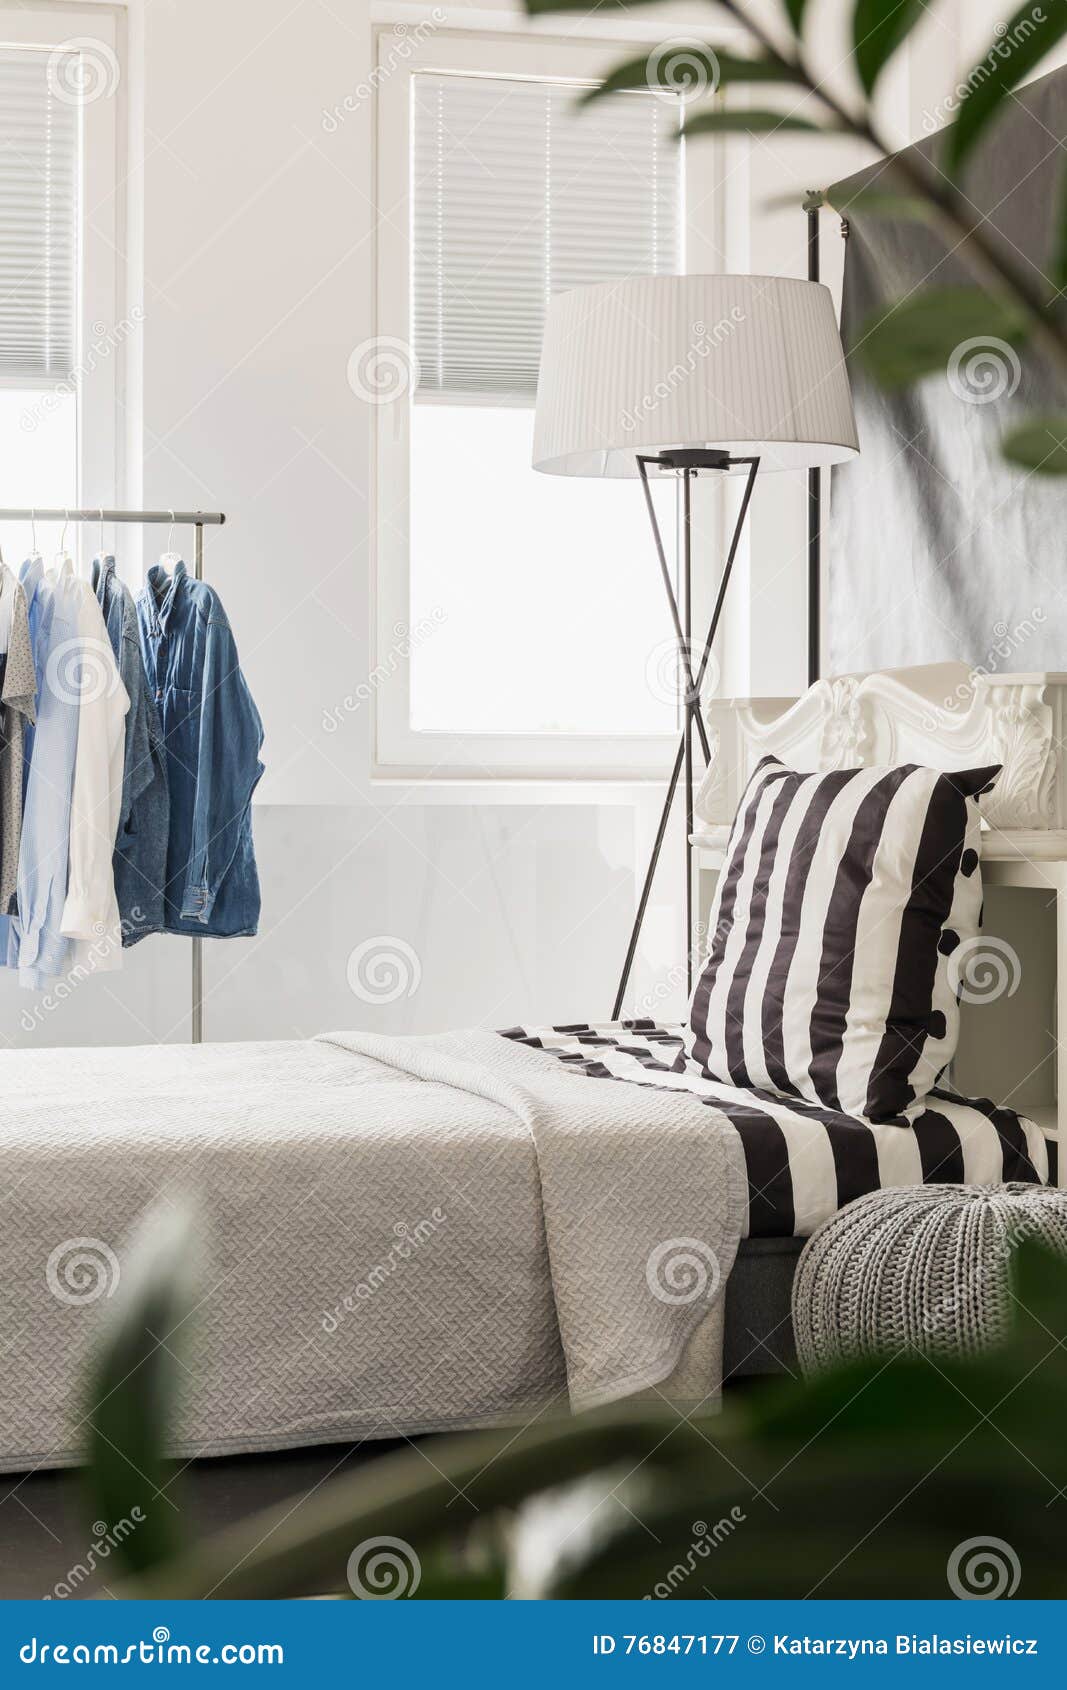 Perfect Flat For A Single Man Stock Image Image Of Decor